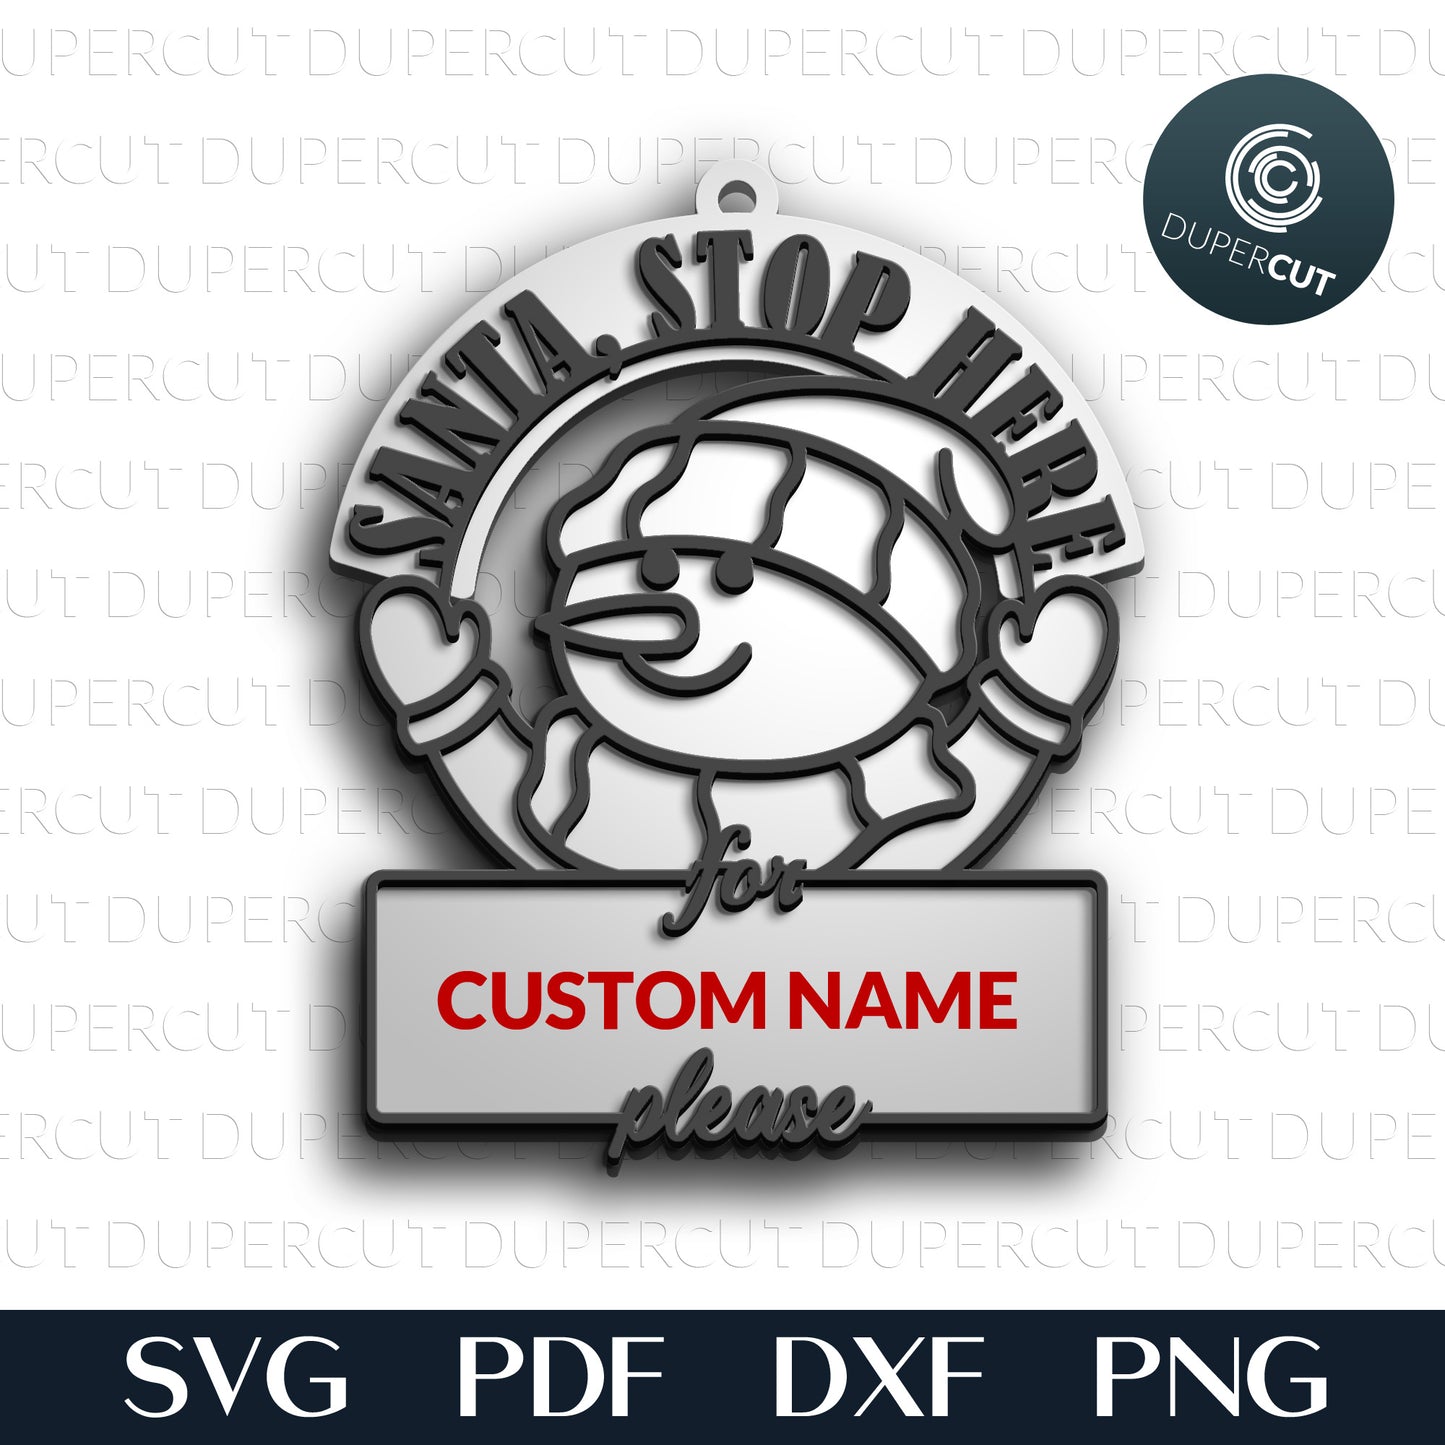 Santa, stop here, personalized Christmas door hanger,  SVG DXF vector layered cutting files for Glowforge, Cricut, Silhouette, CNC laser machines by DuperCut